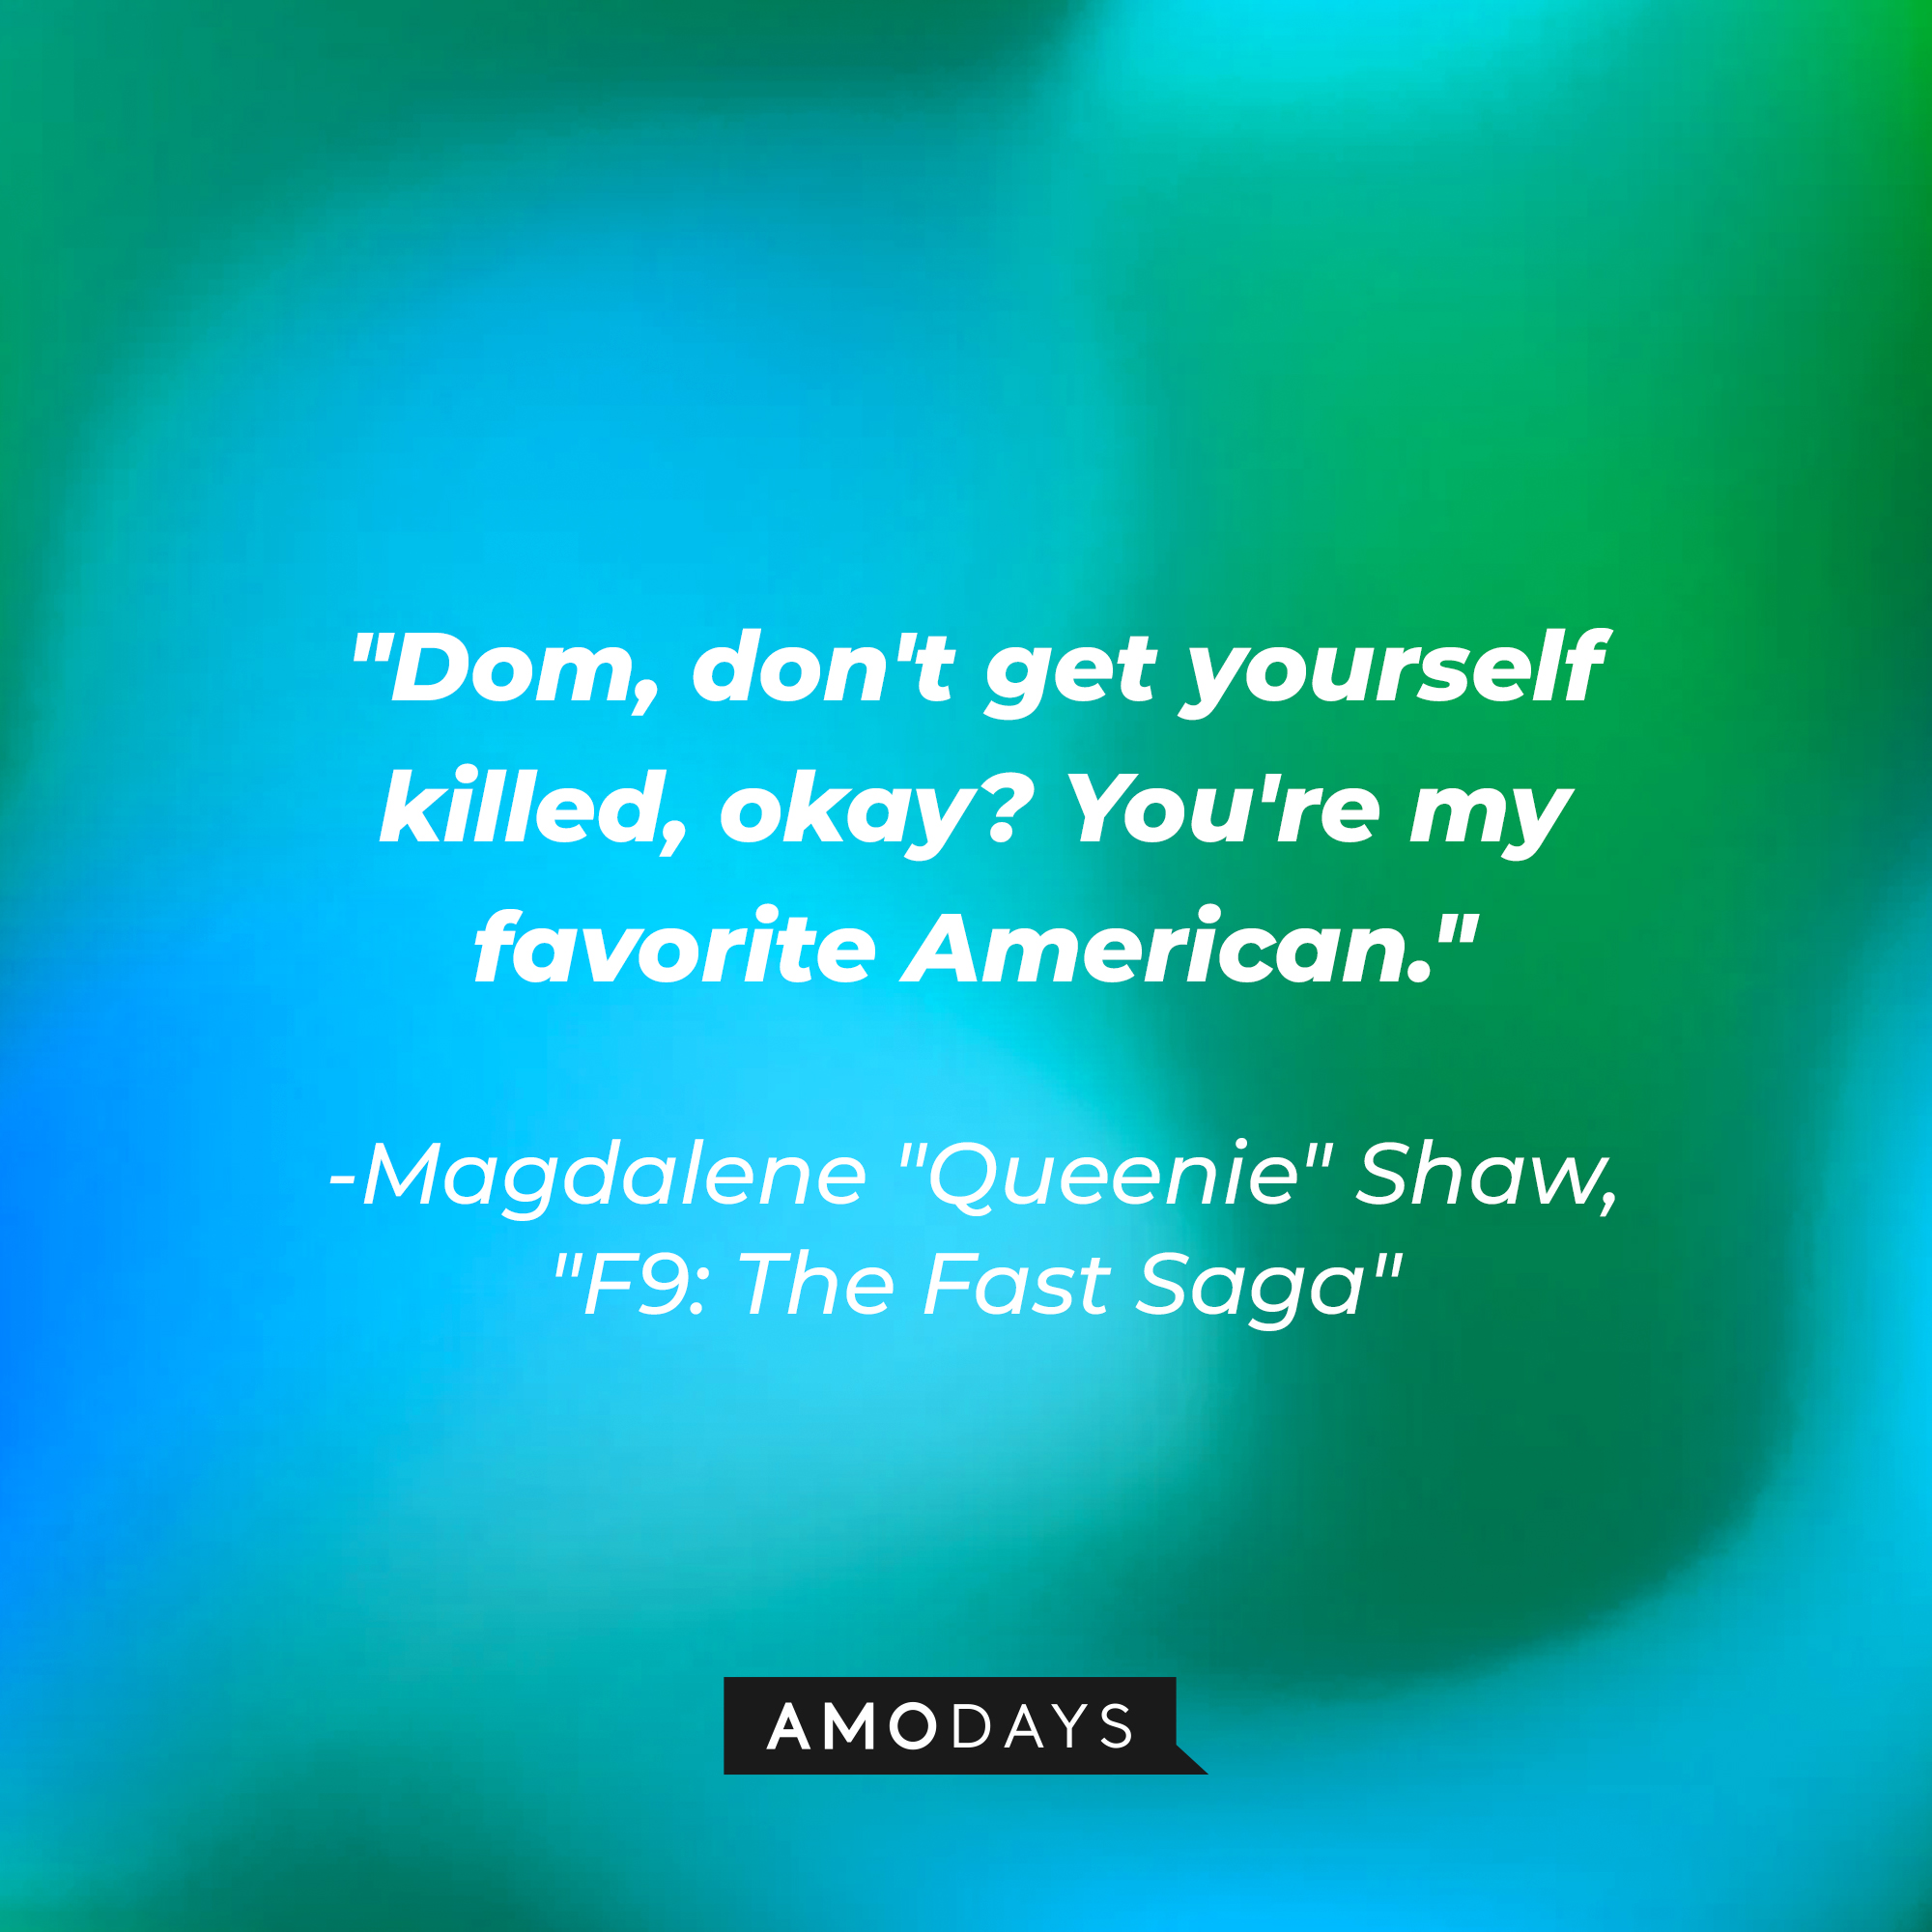 Queenie ‘s quote: "Dom, don't get yourself killed, okay? You're my favorite American." | Image: AmoDays